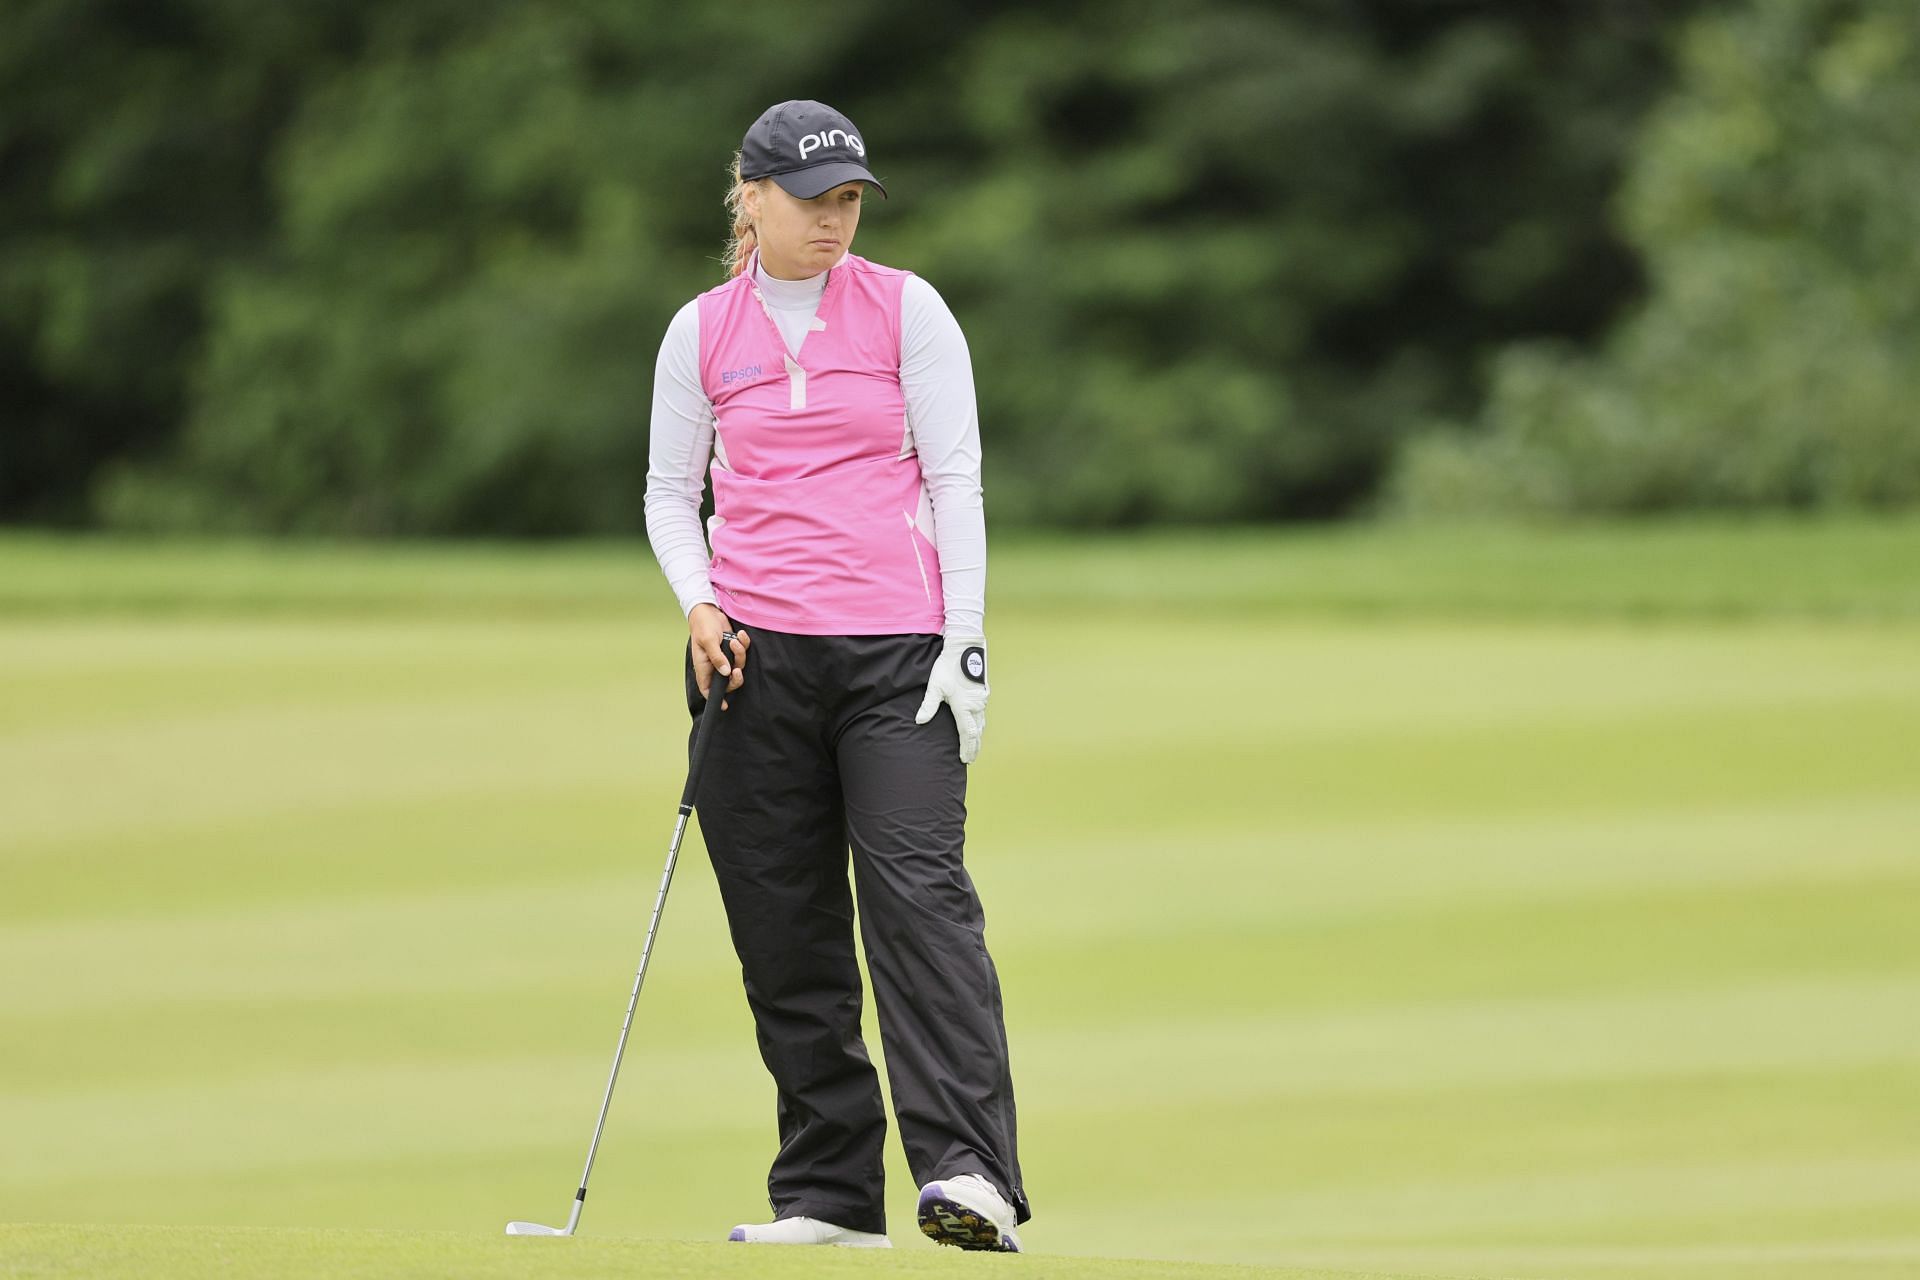 “Just want someone to carry the bag” – KPMG Women's PGA Championship ...